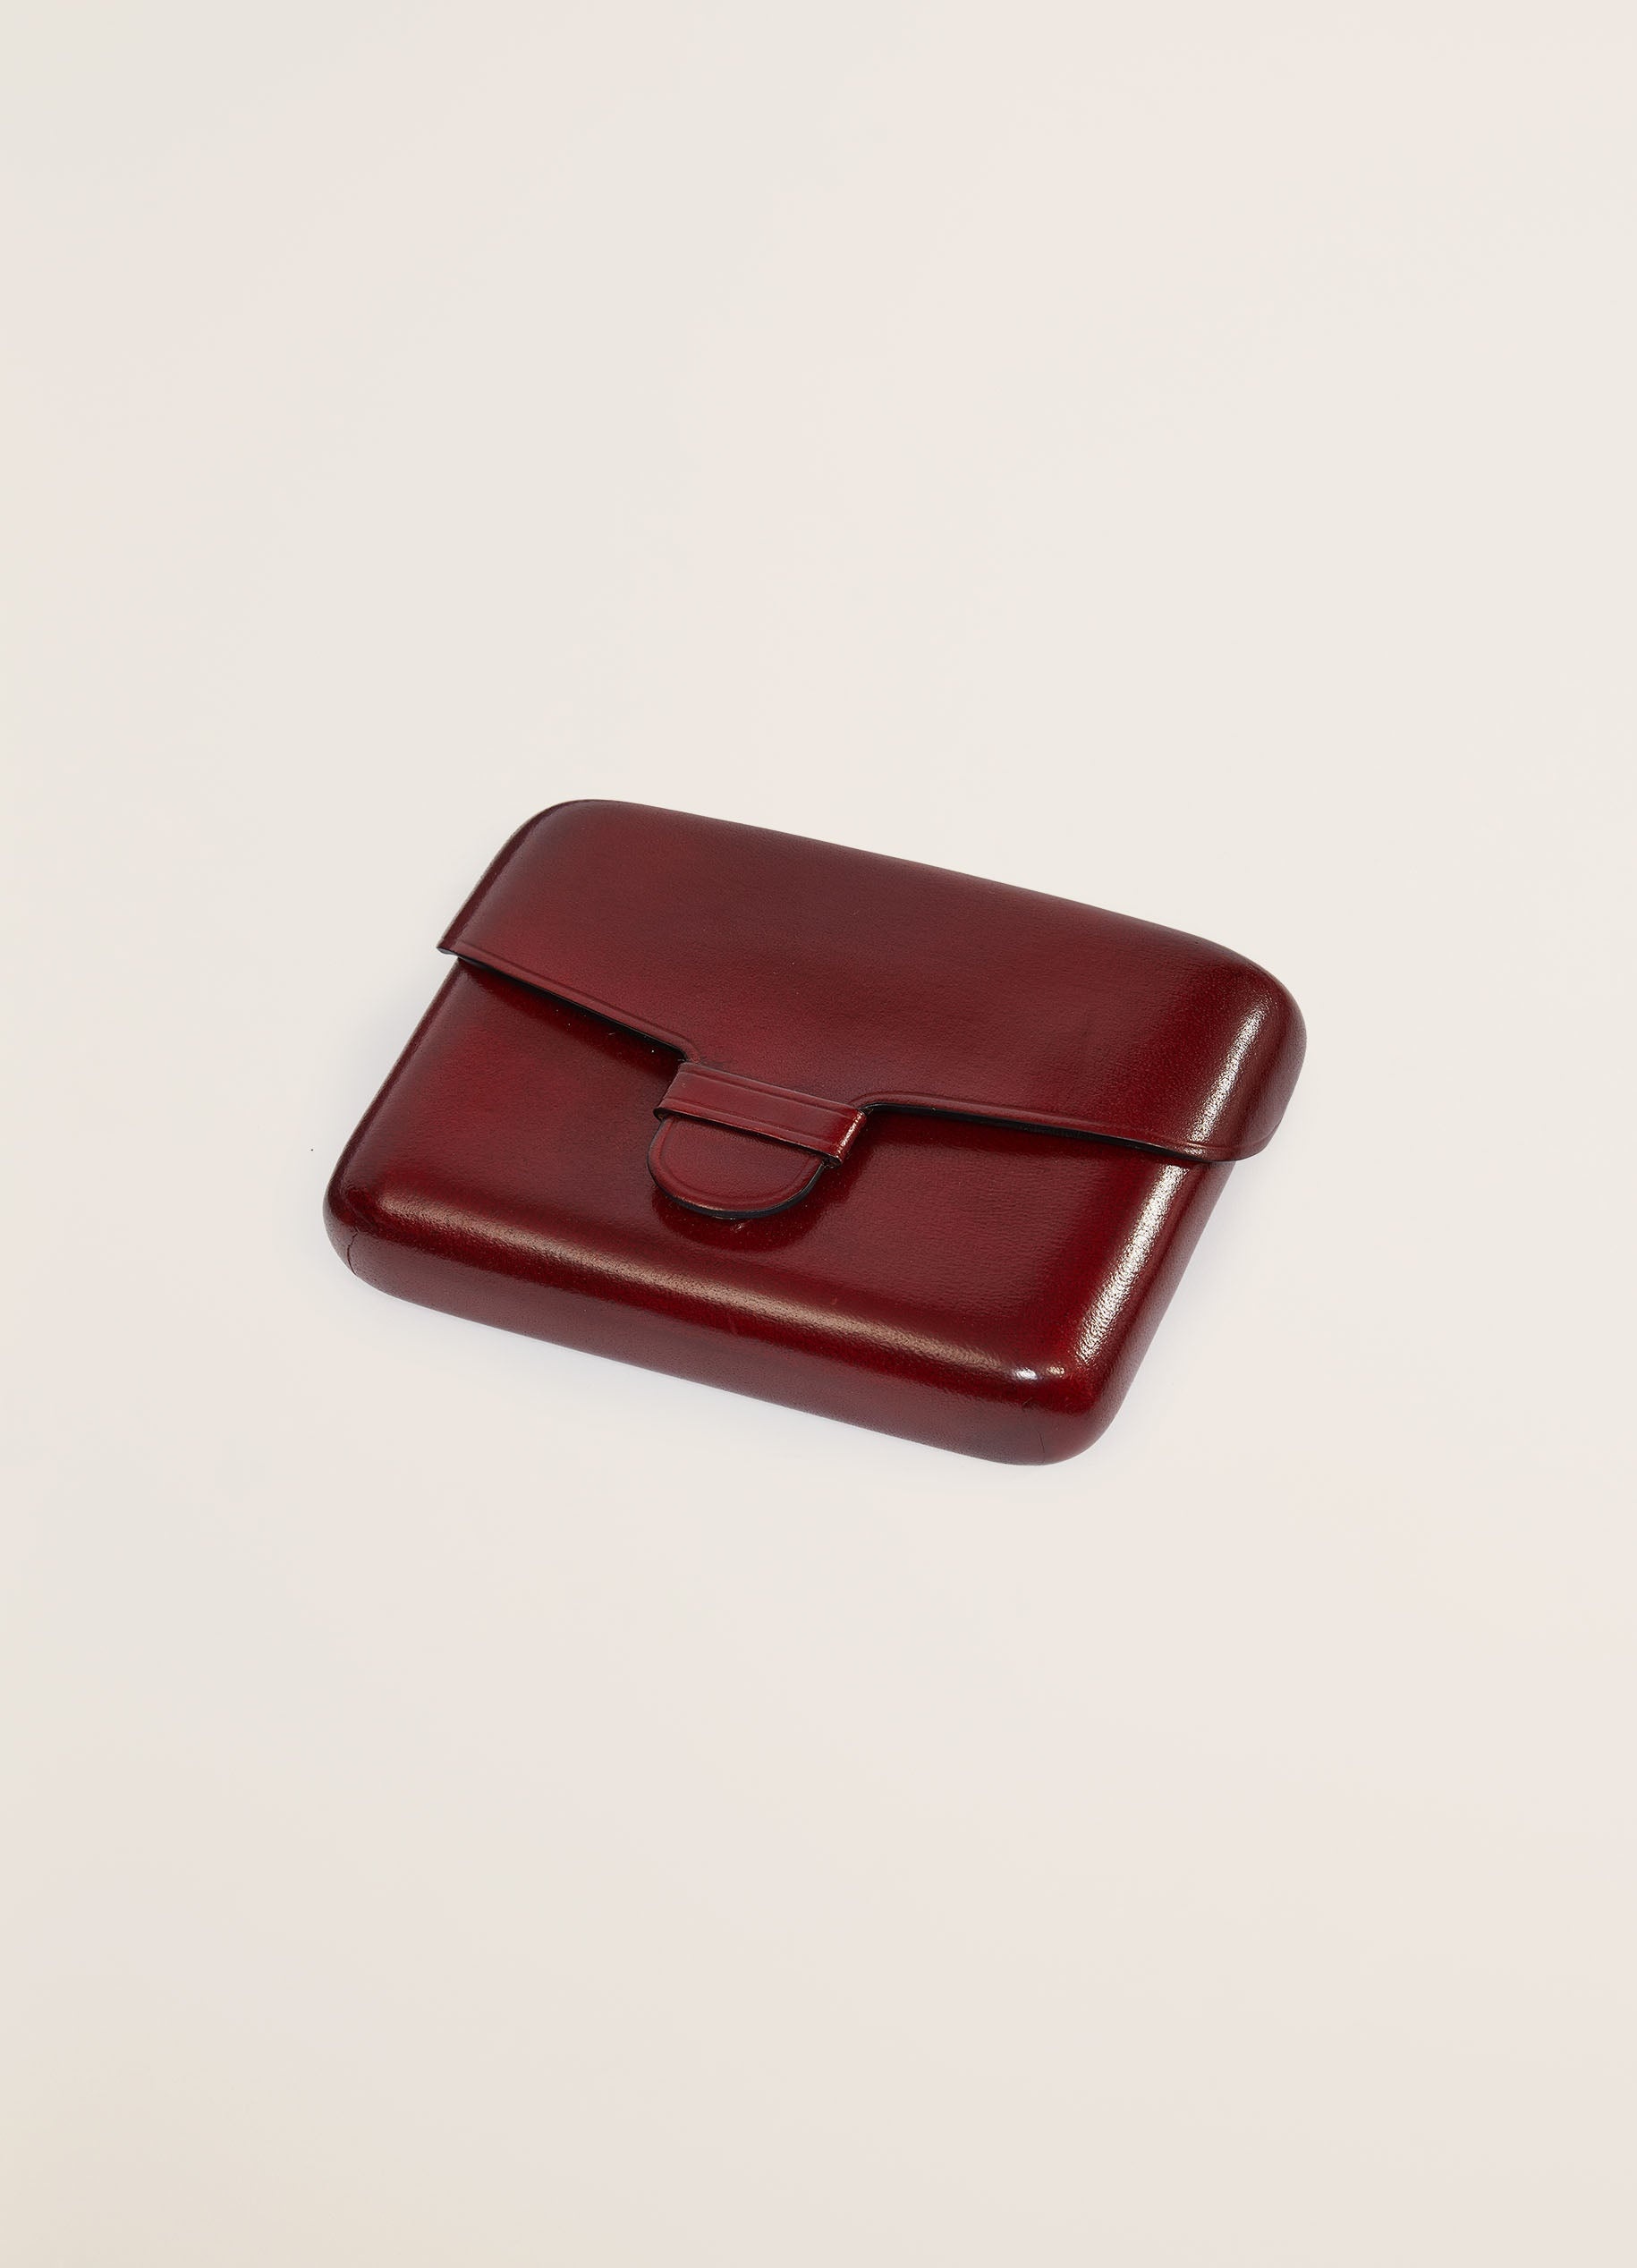 IL BUSSETTO FOR LEMAIRE CARD HOLDER - 3